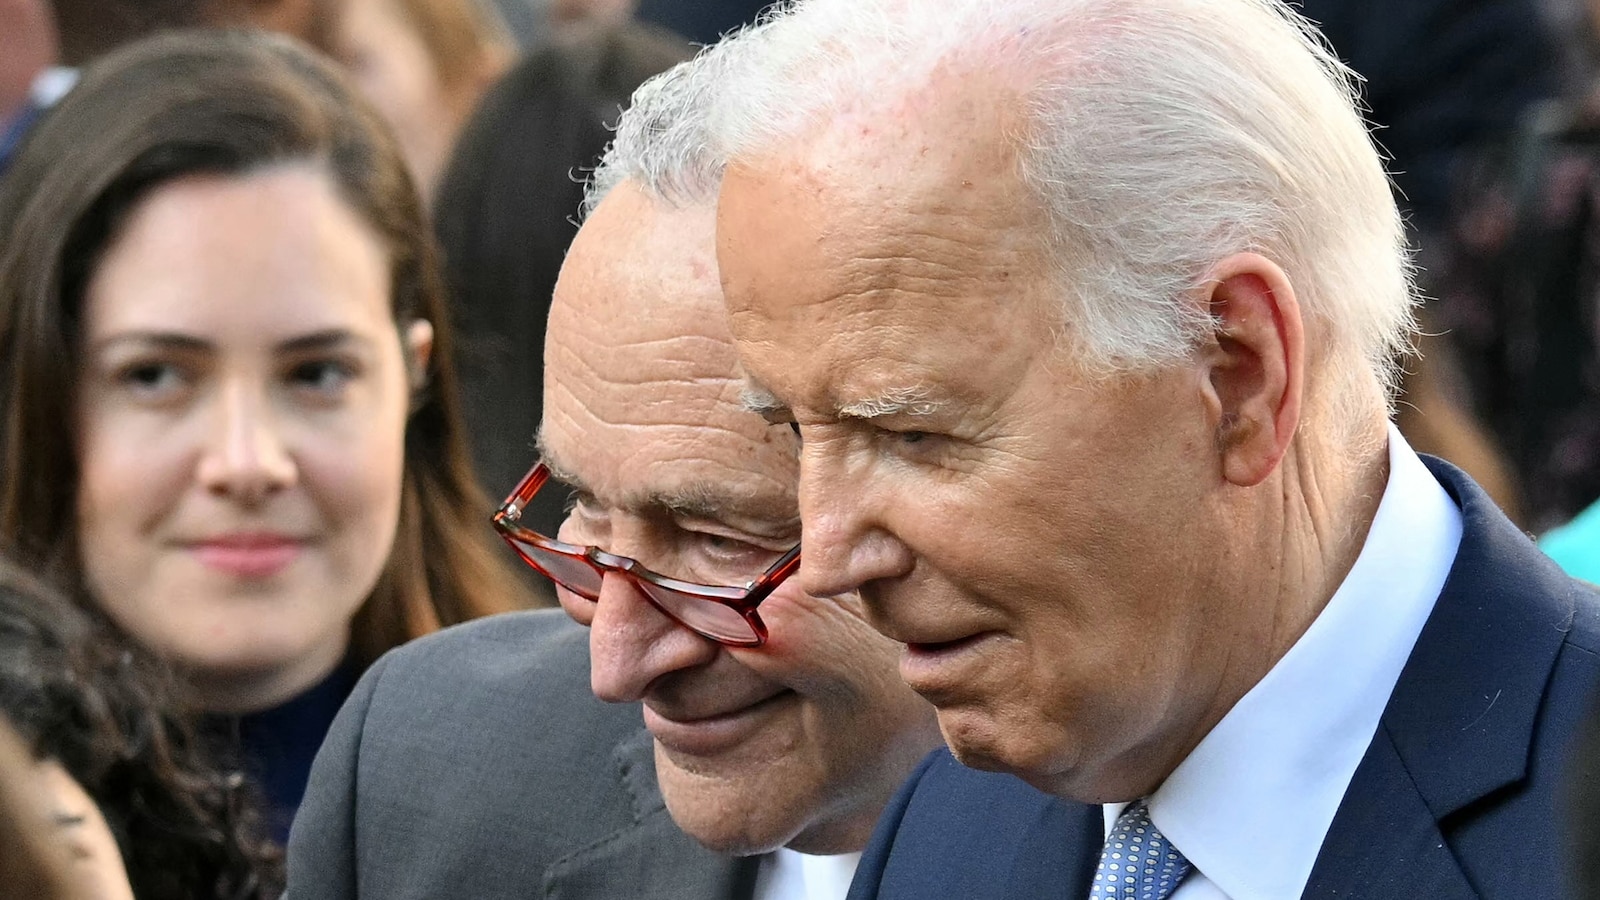 Schumer, Jeffries privately urged Biden to step aside in 2024 election: Sources